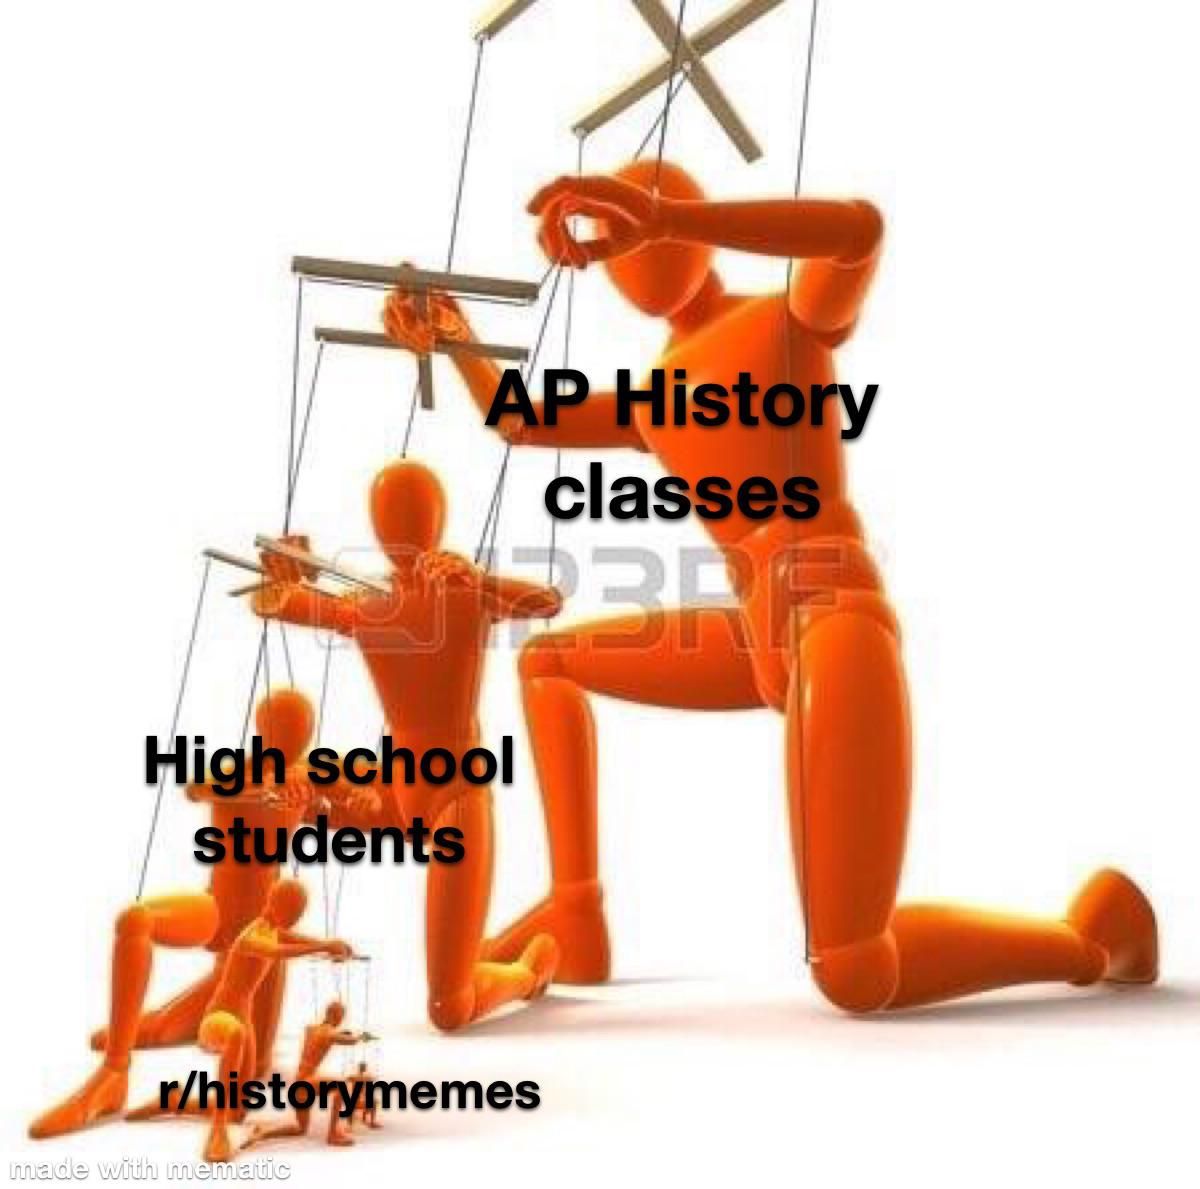 Have any of you noticed that there is an increase in memes about topics right after AP or regular classes would cover them?